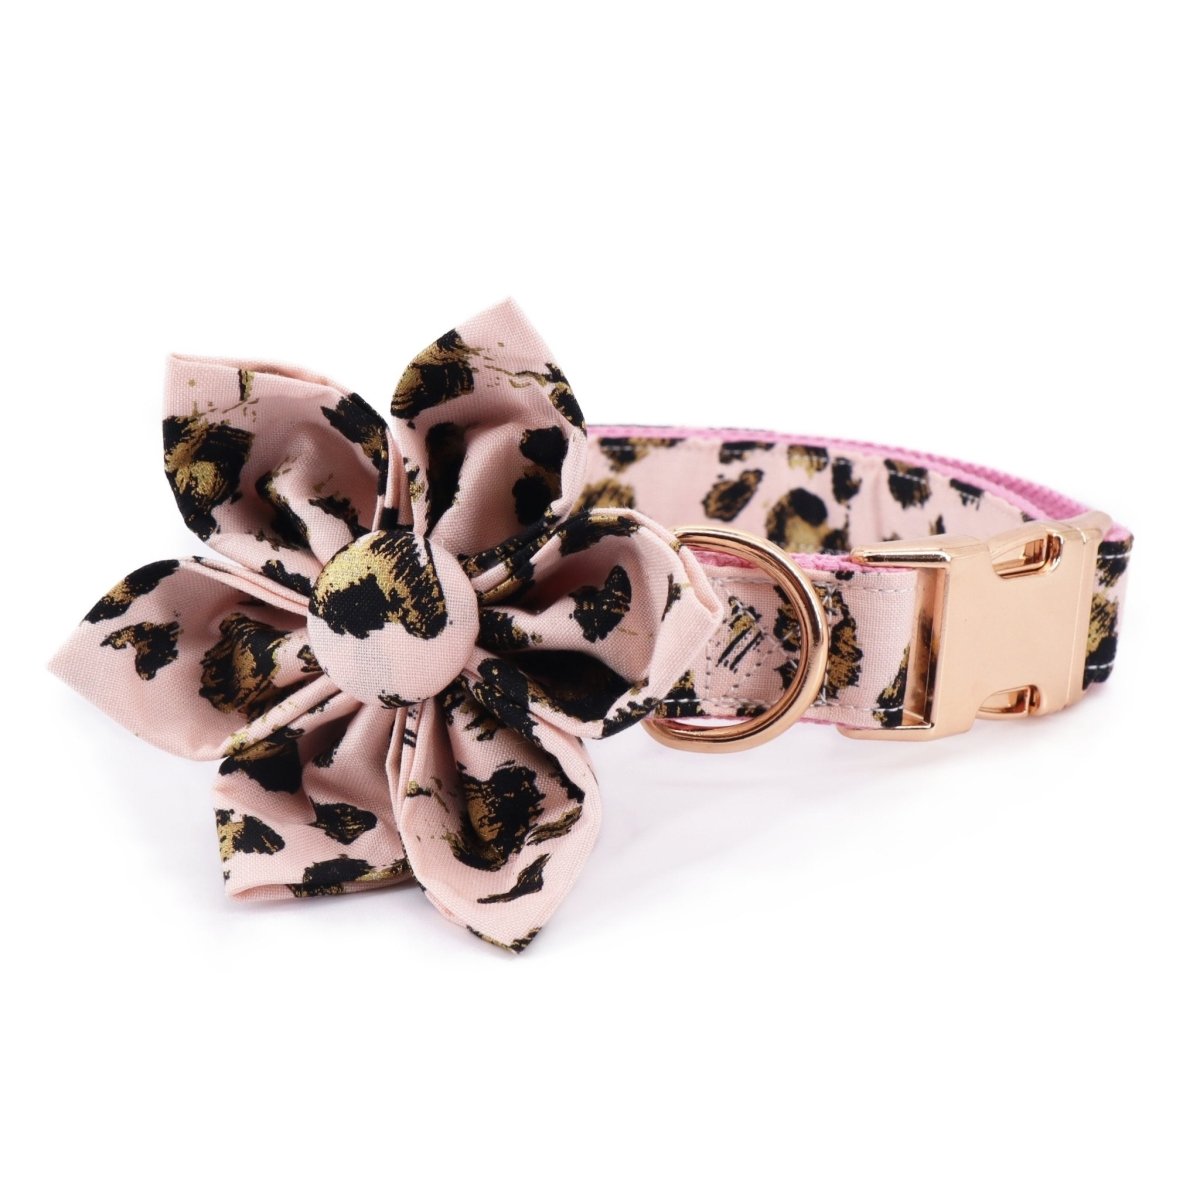 unique dog collars and leashes - dog flower collar with name - dog flower collar wedding